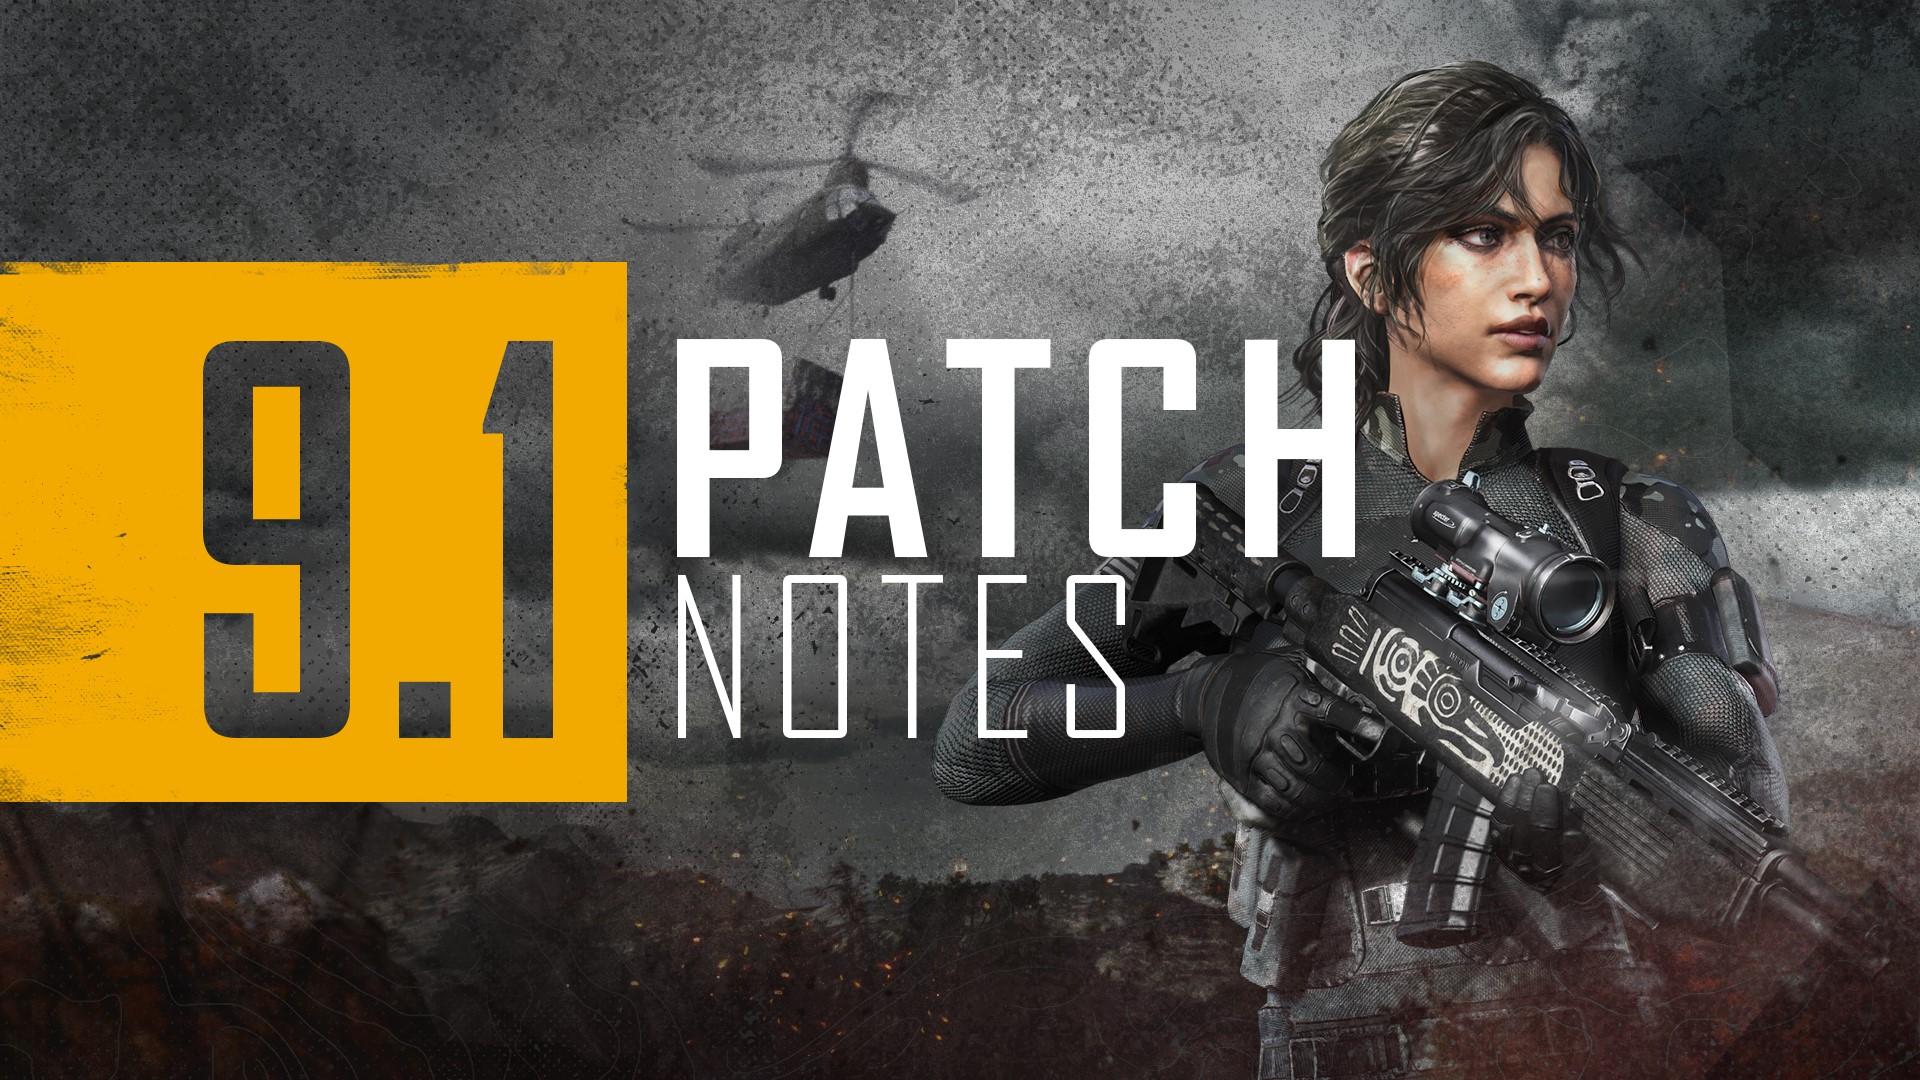 Advertising PUBG 9.1 patch notes